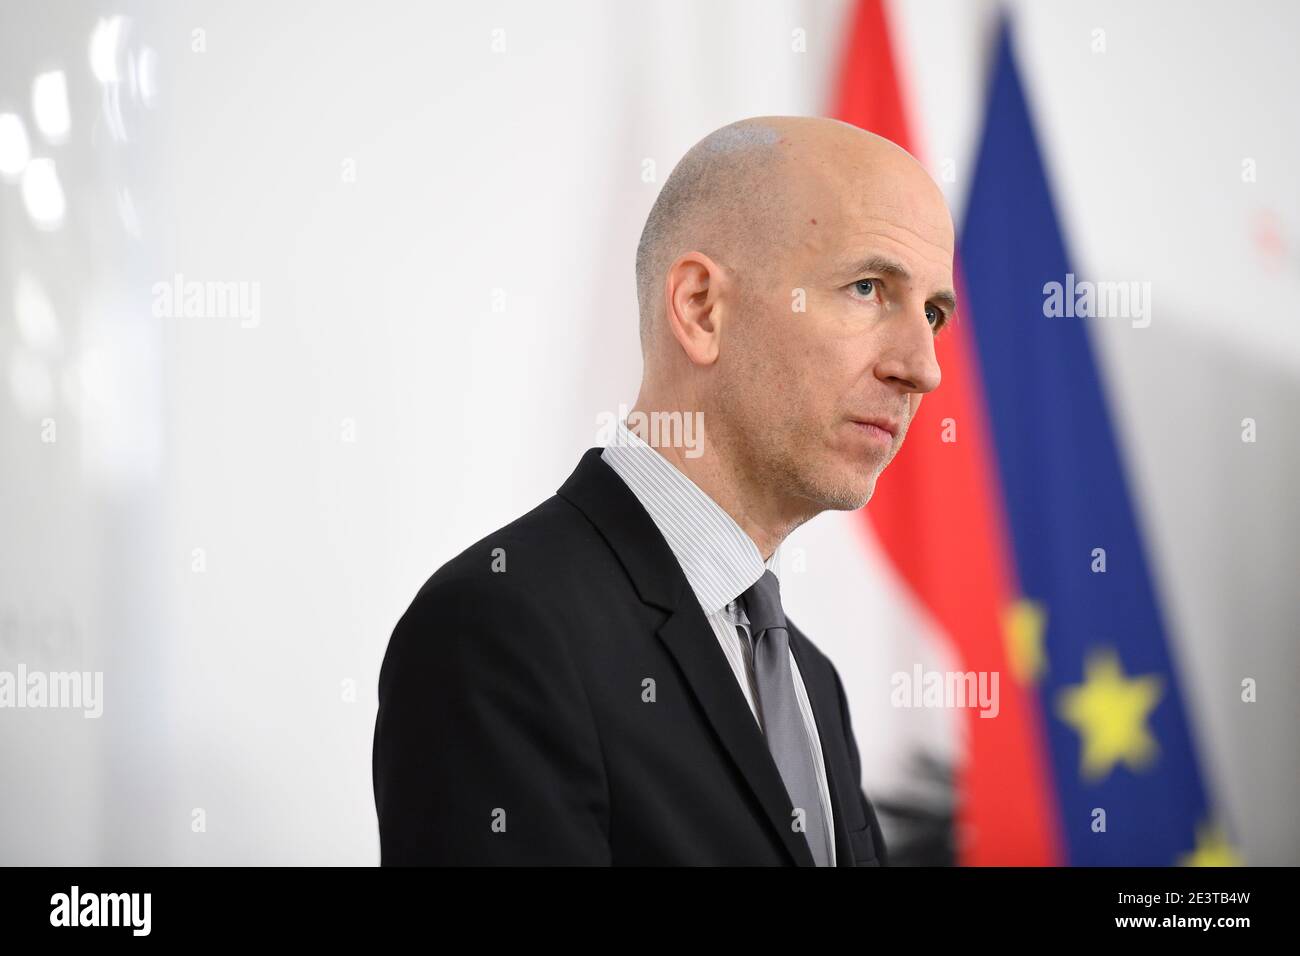 Vienna, Austria, New People's Party, Austrian People's Party, övp, oevp, politics, politician, press conference, Federal Chancellery, Austrian Federal Chancellery, martin kocher, Labor Minister Martin Kocher, Stock Photo